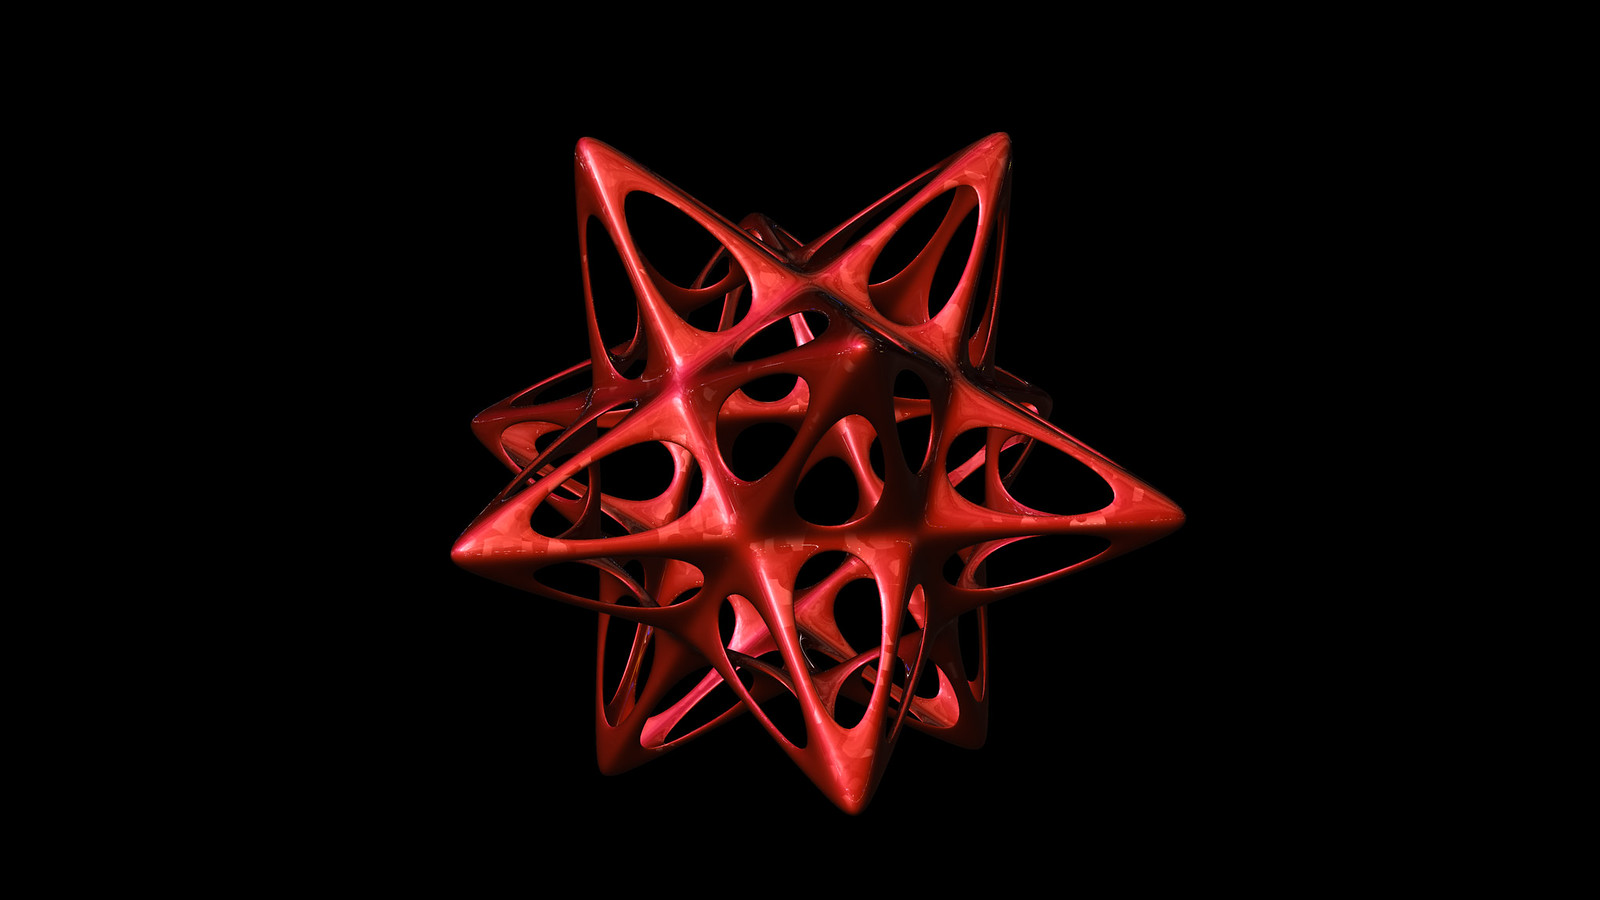 Dodecahedron spiky soft